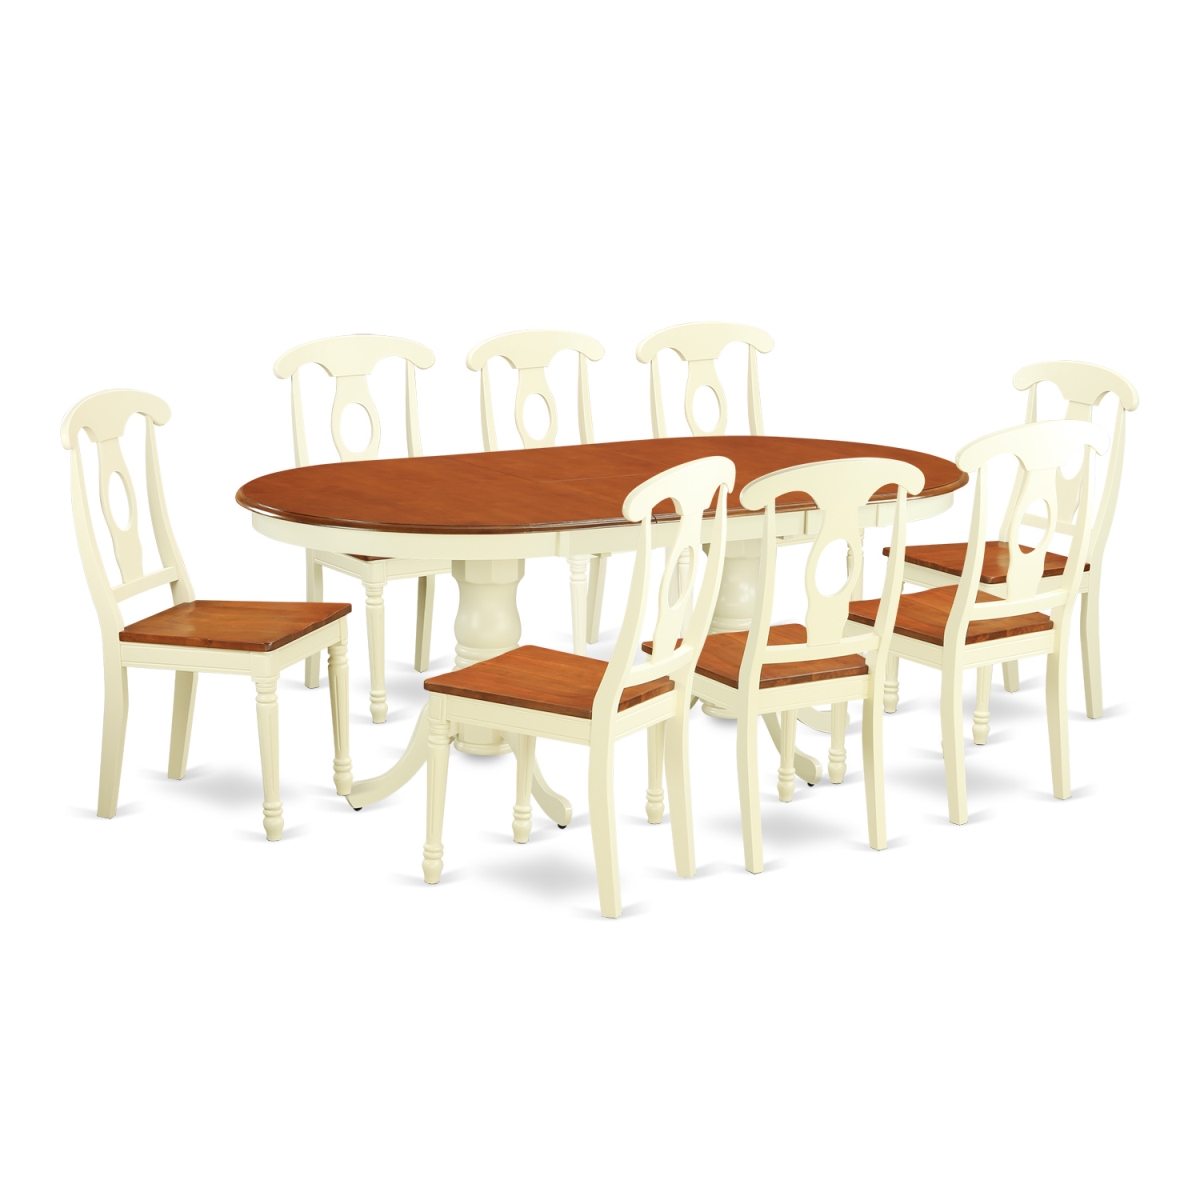 Plke9-whi-w Wood Seat Dinette Set With 8 Table & 8 Chairs, Buttermilk & Cherry - 9 Piece